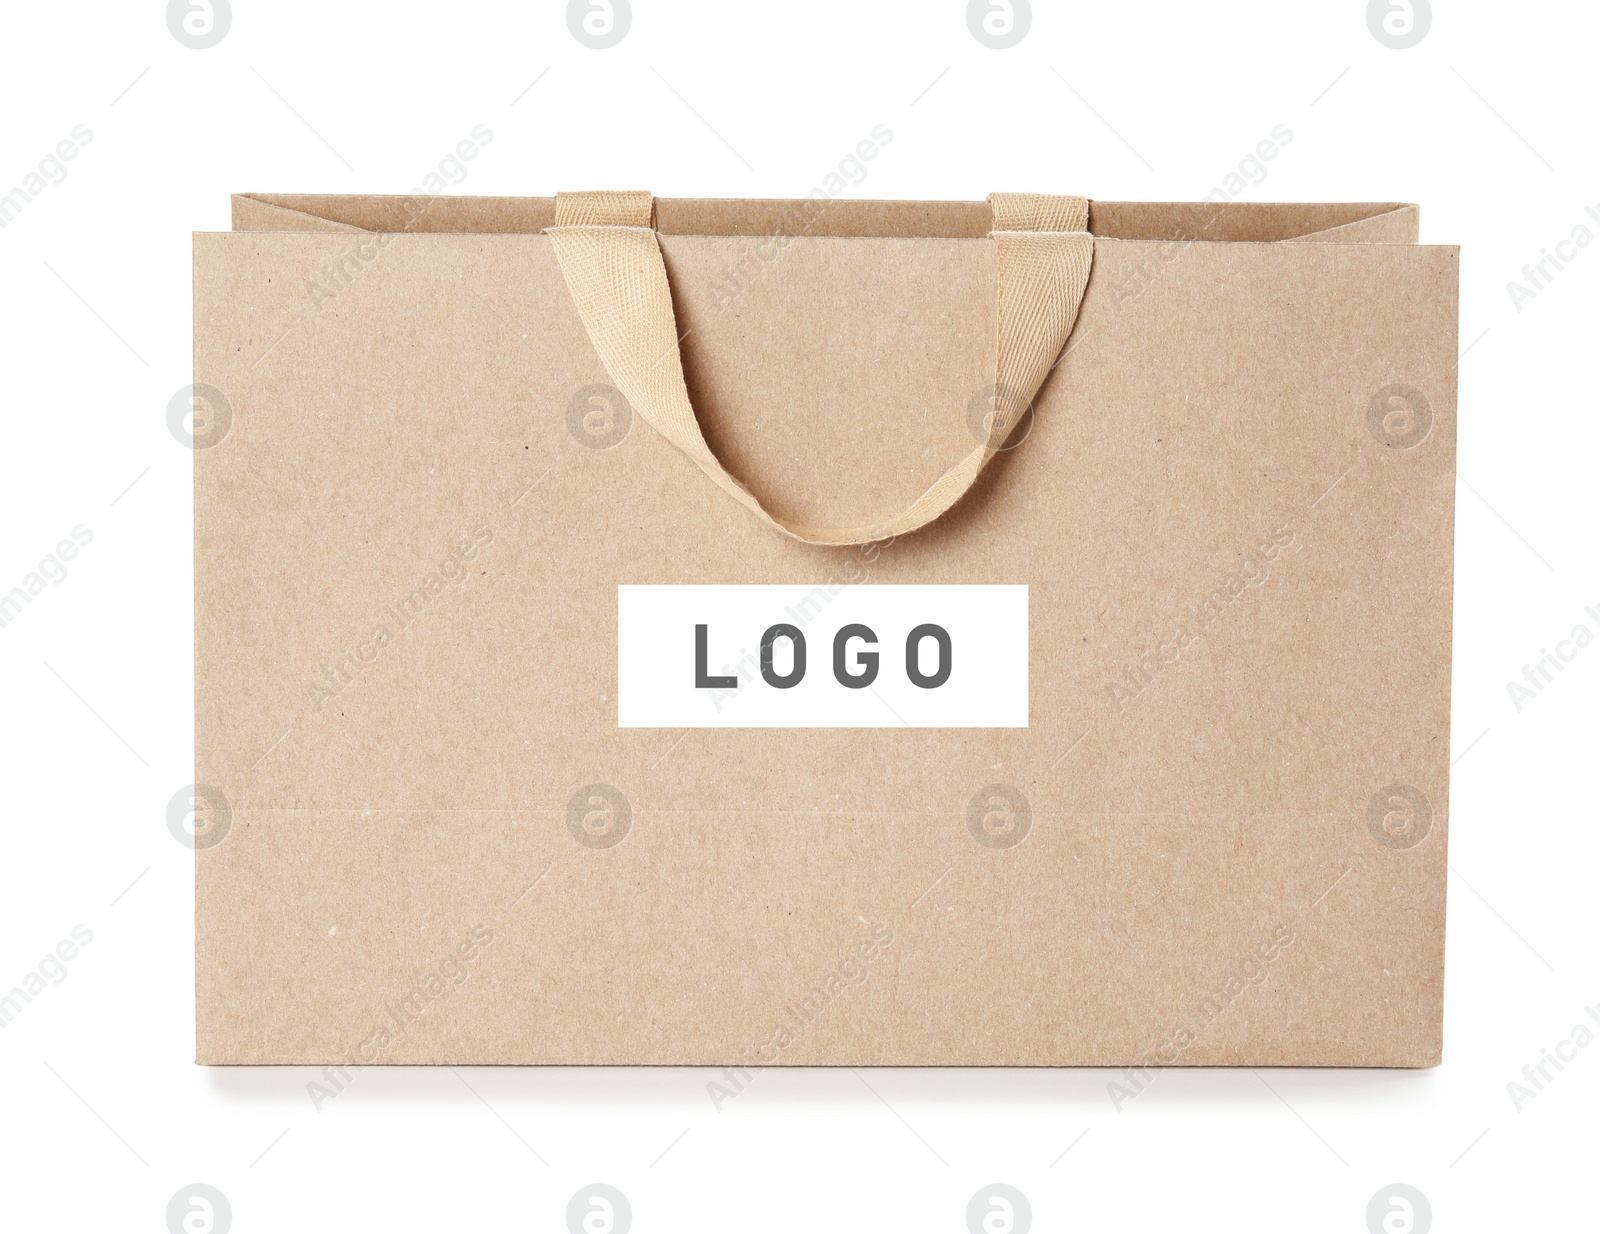 Image of Paper shopping bag with logo on white background